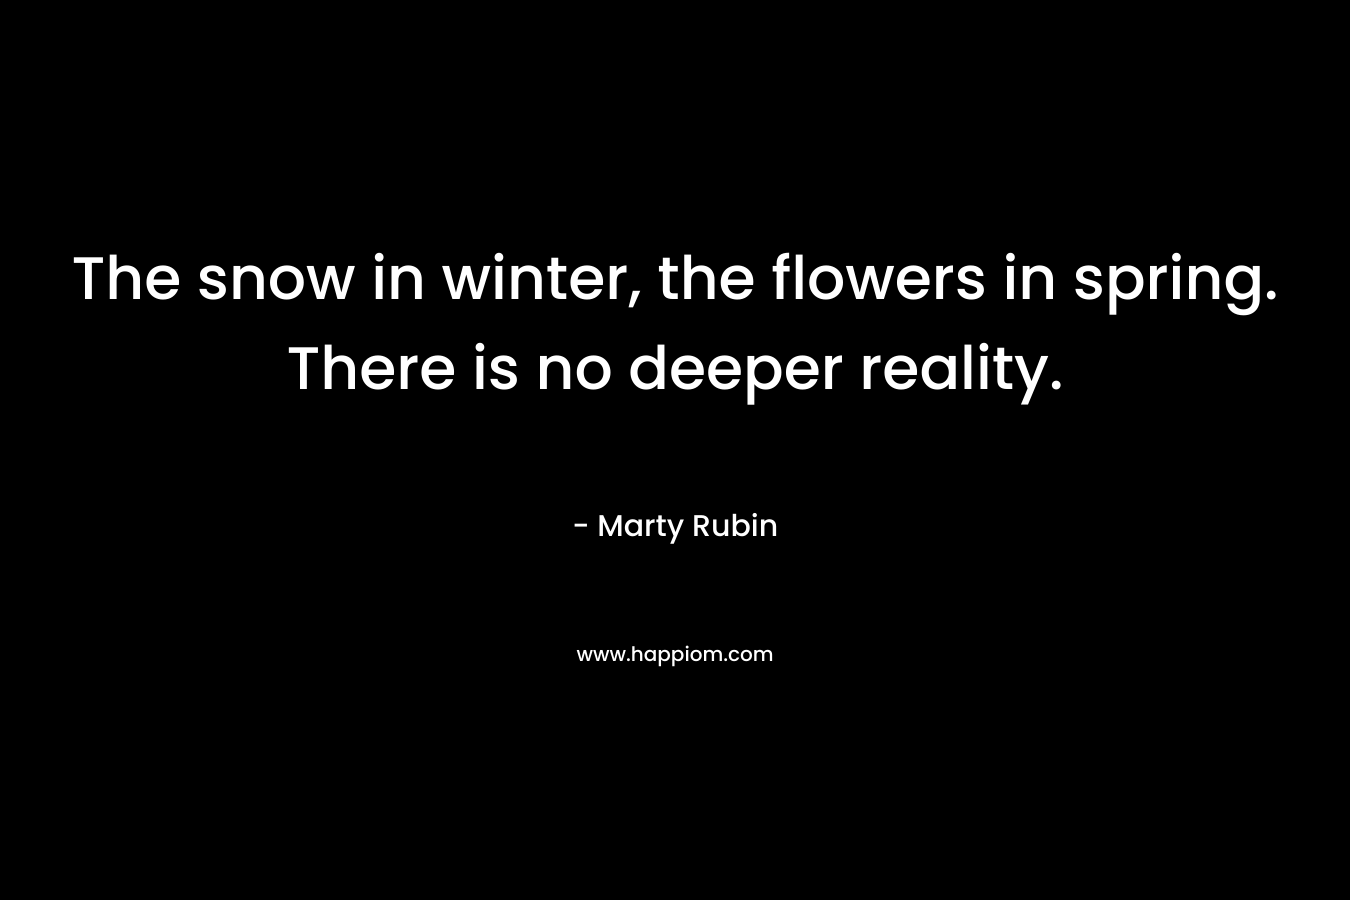 The snow in winter, the flowers in spring. There is no deeper reality.